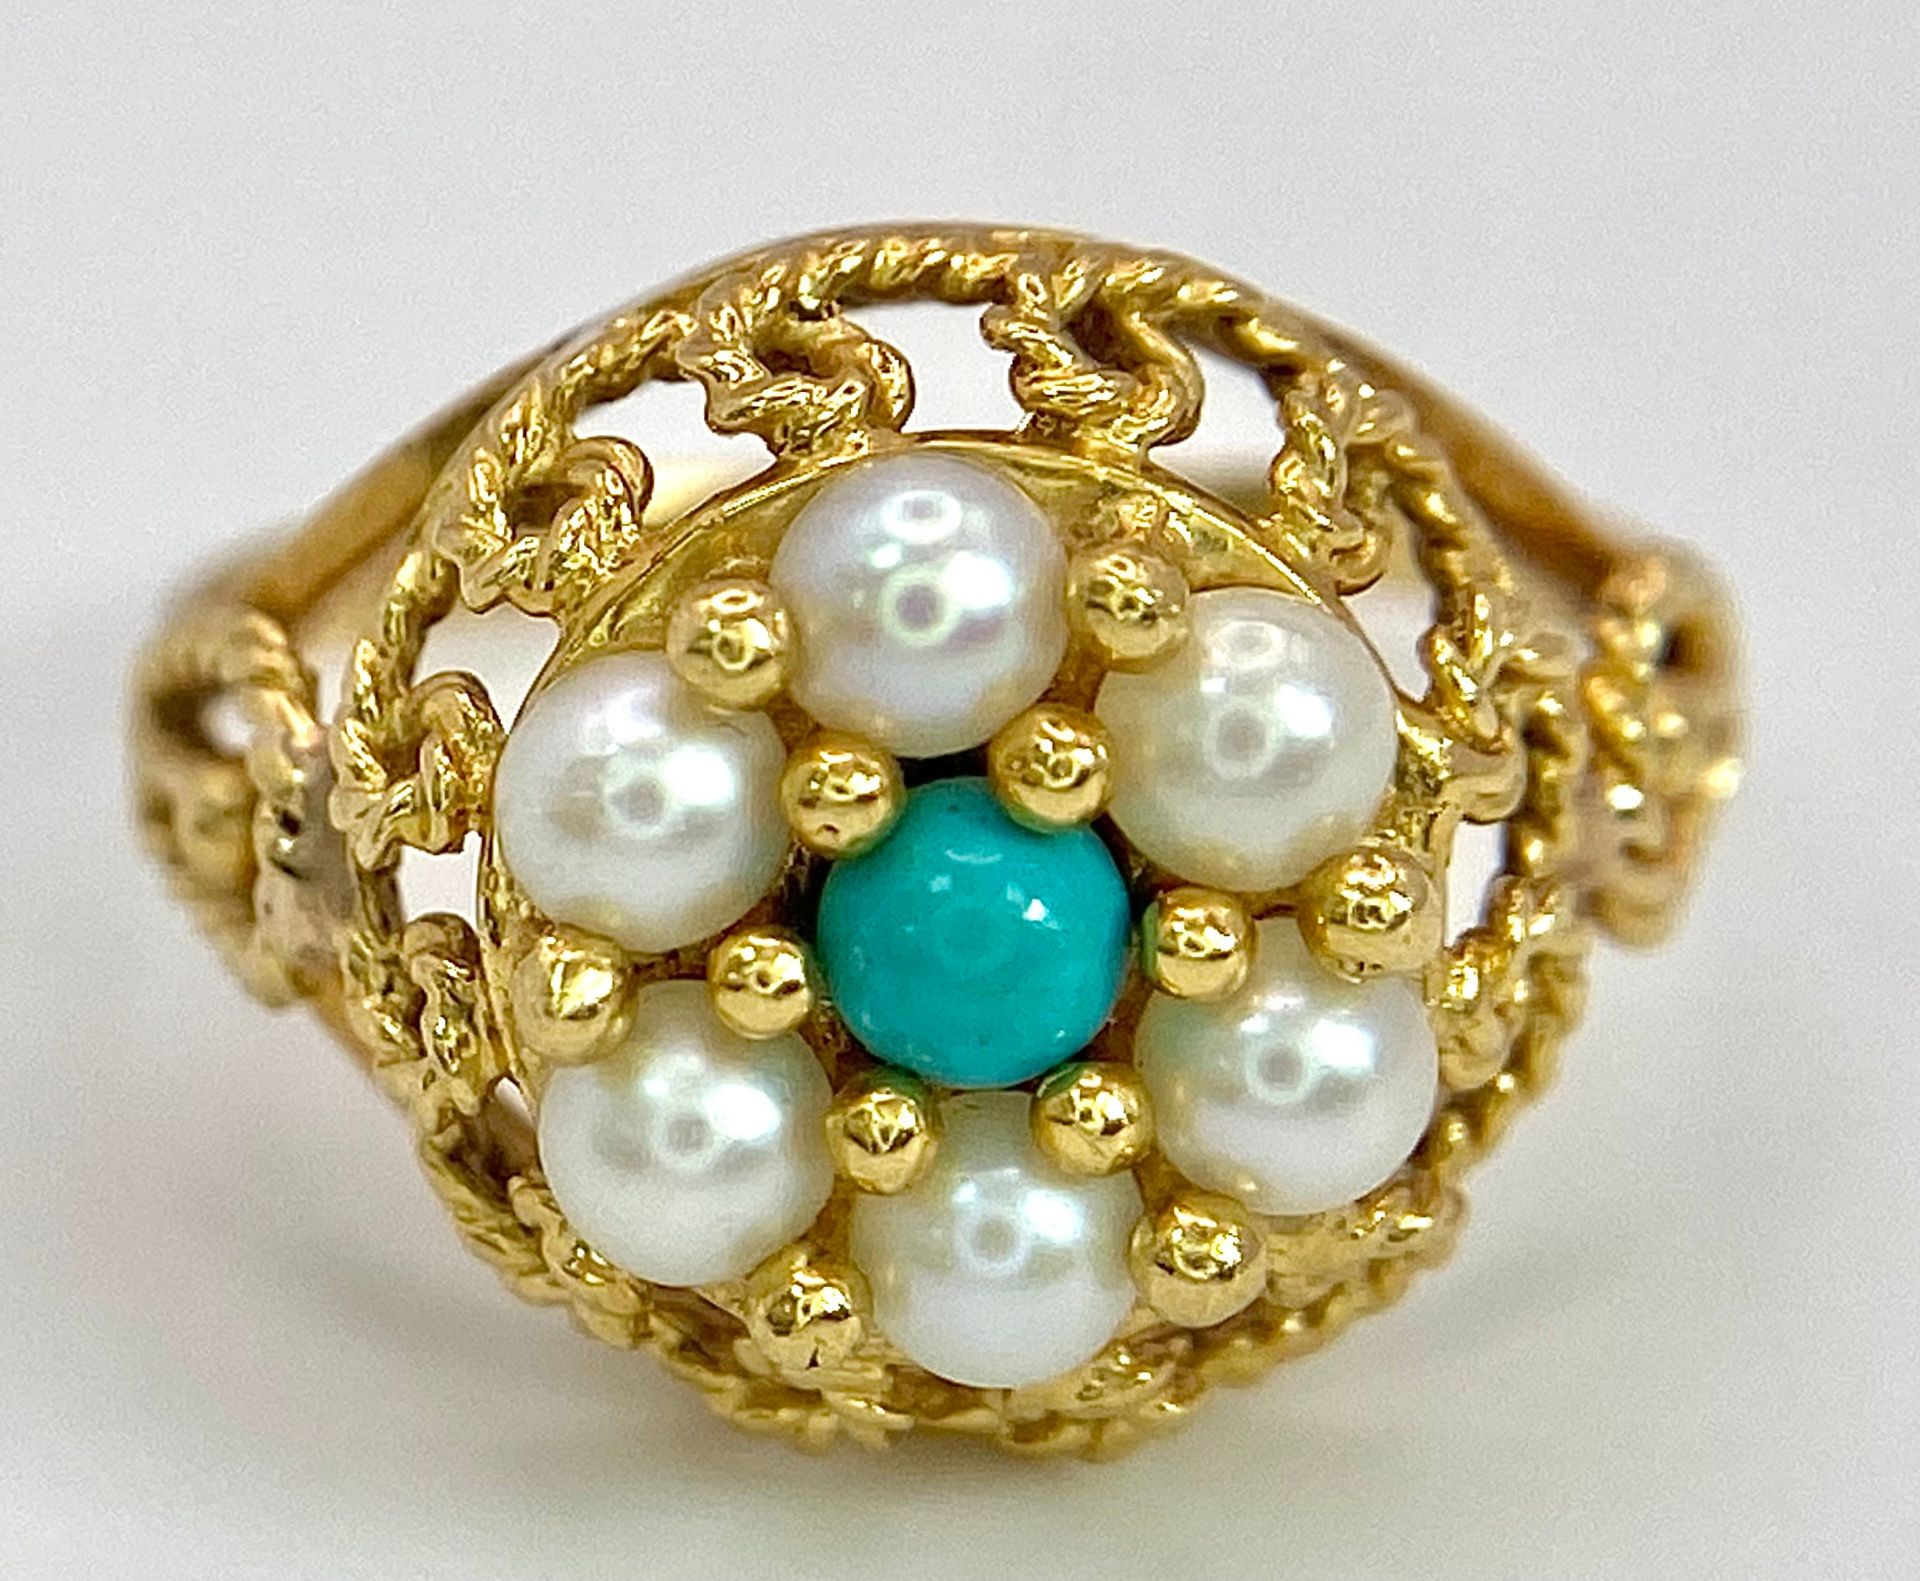 A 14K (TESTED) YELLOW GOLD VINTAGE PEARL & TURQUISE RING. Size K, 2.9g total weight. Ref: SC 9031 - Image 4 of 5